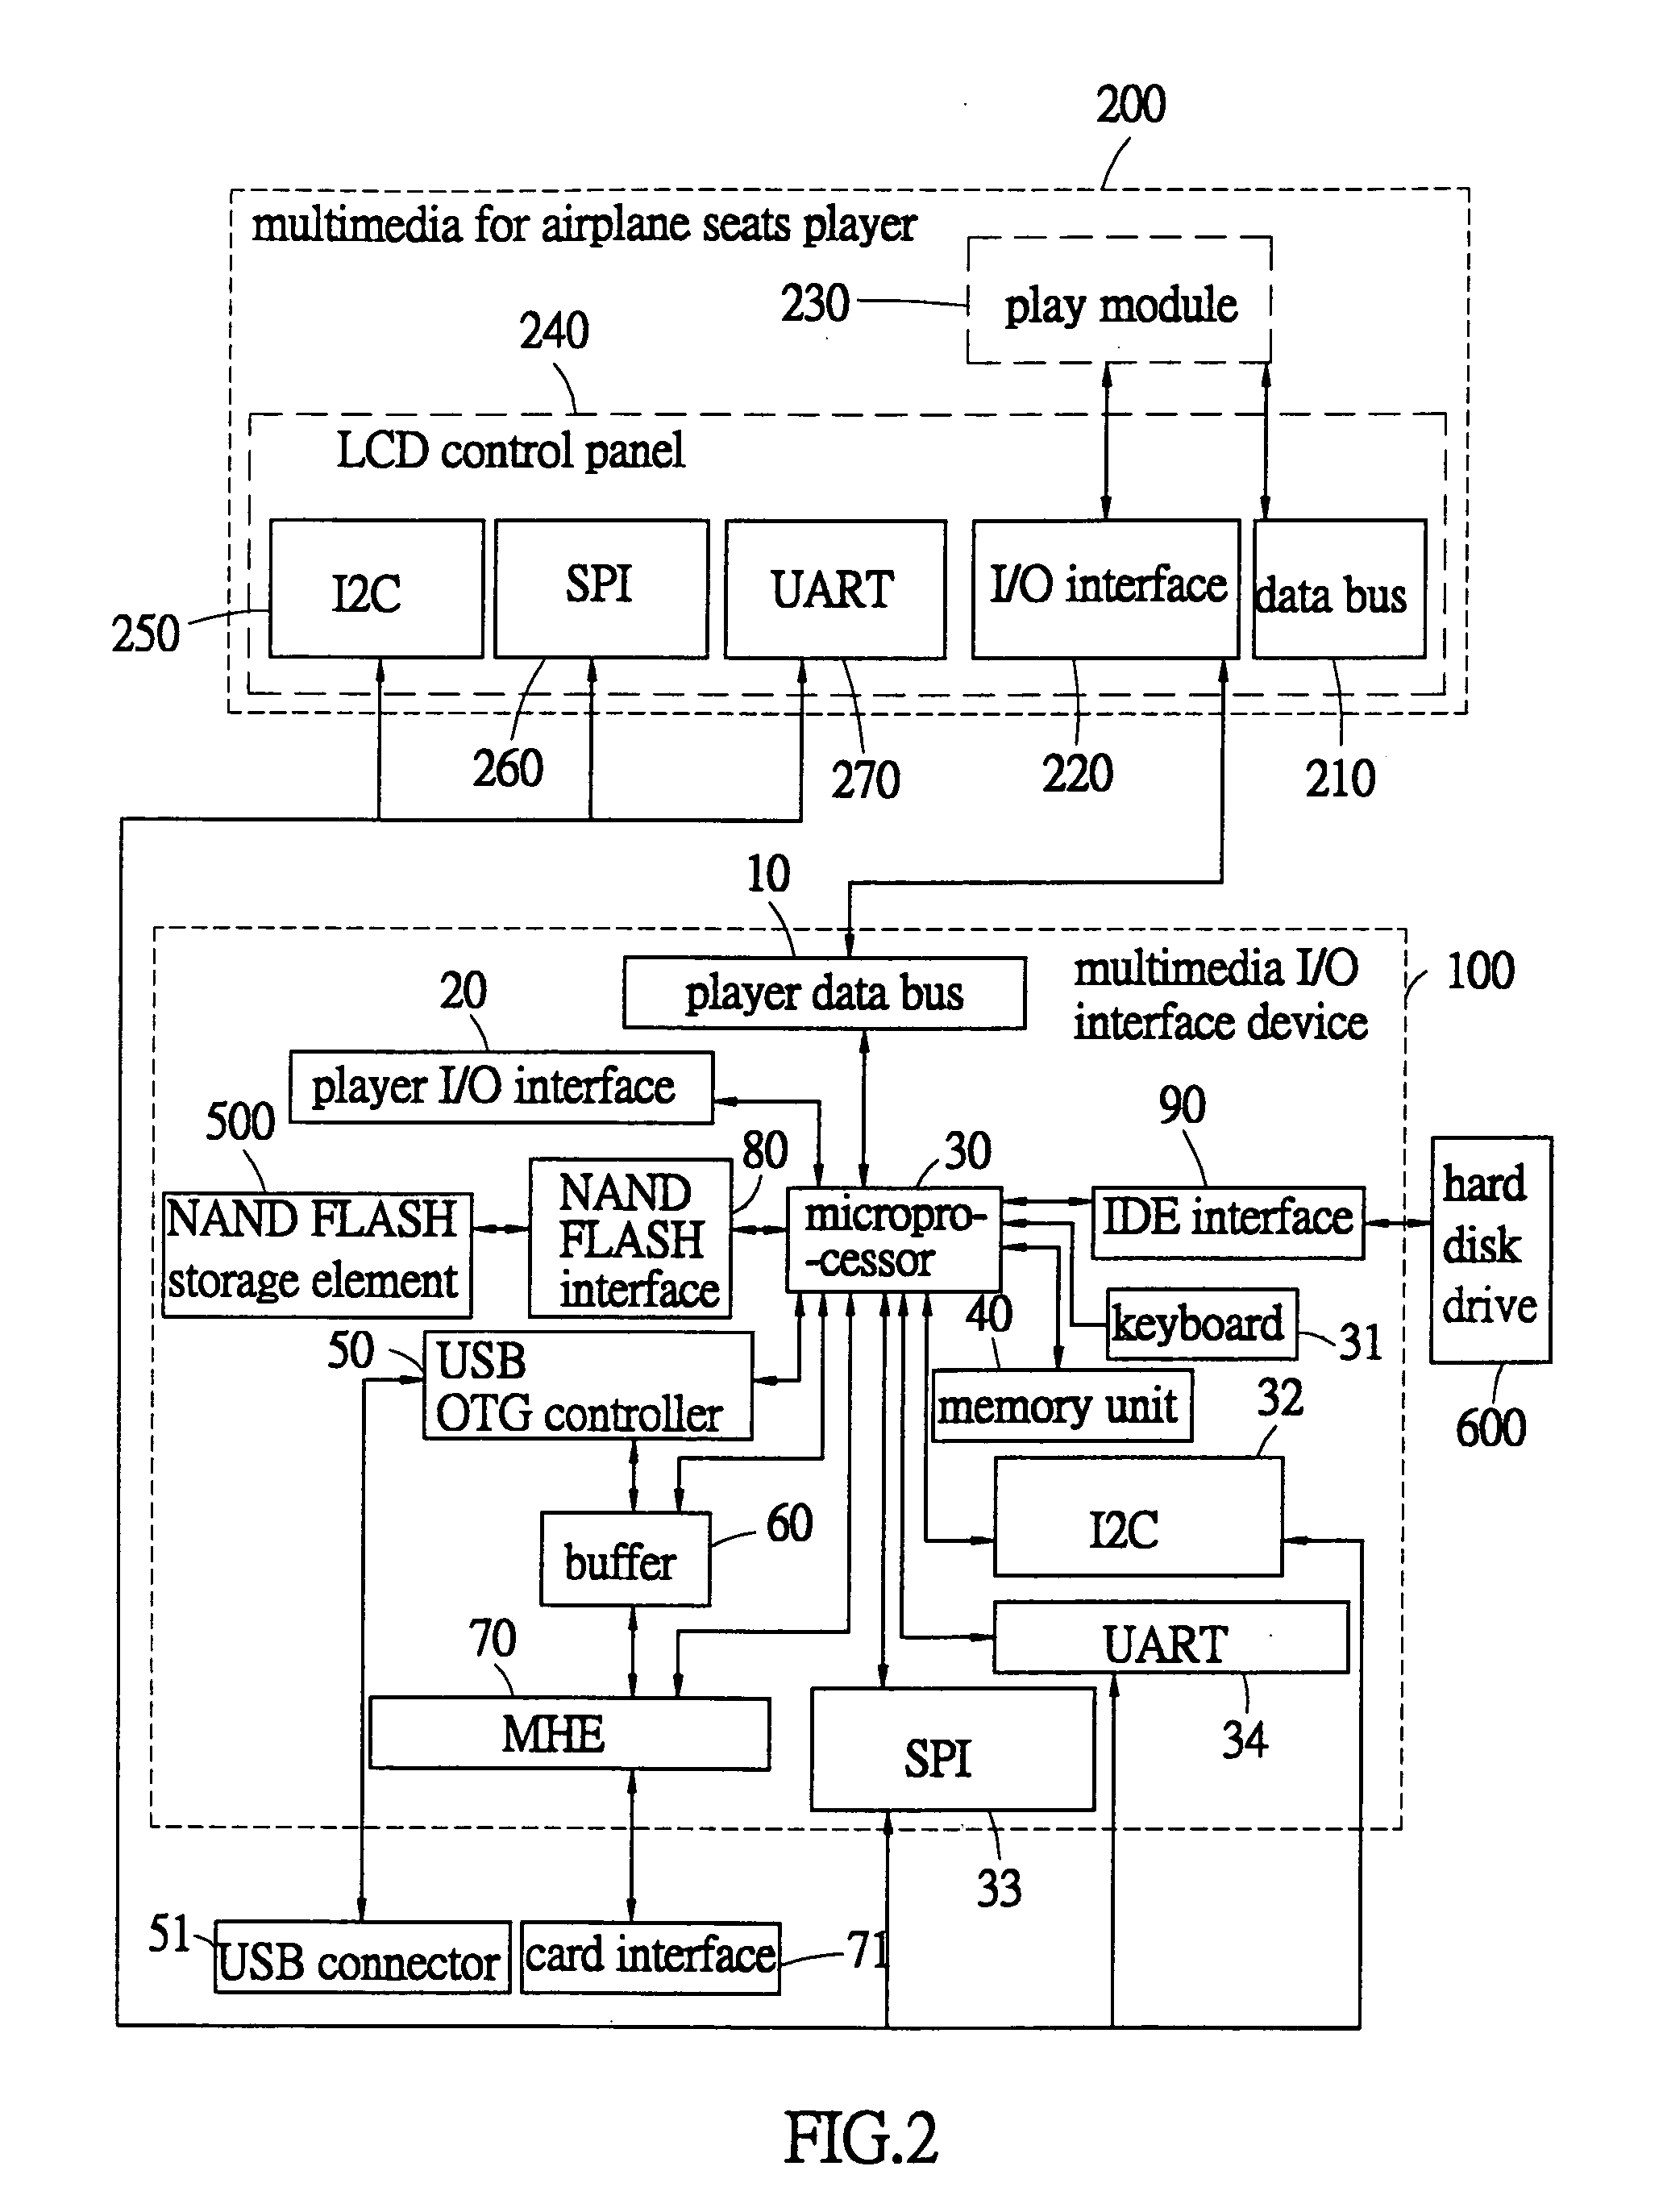 Multimedia I/O interface device for airplane seat